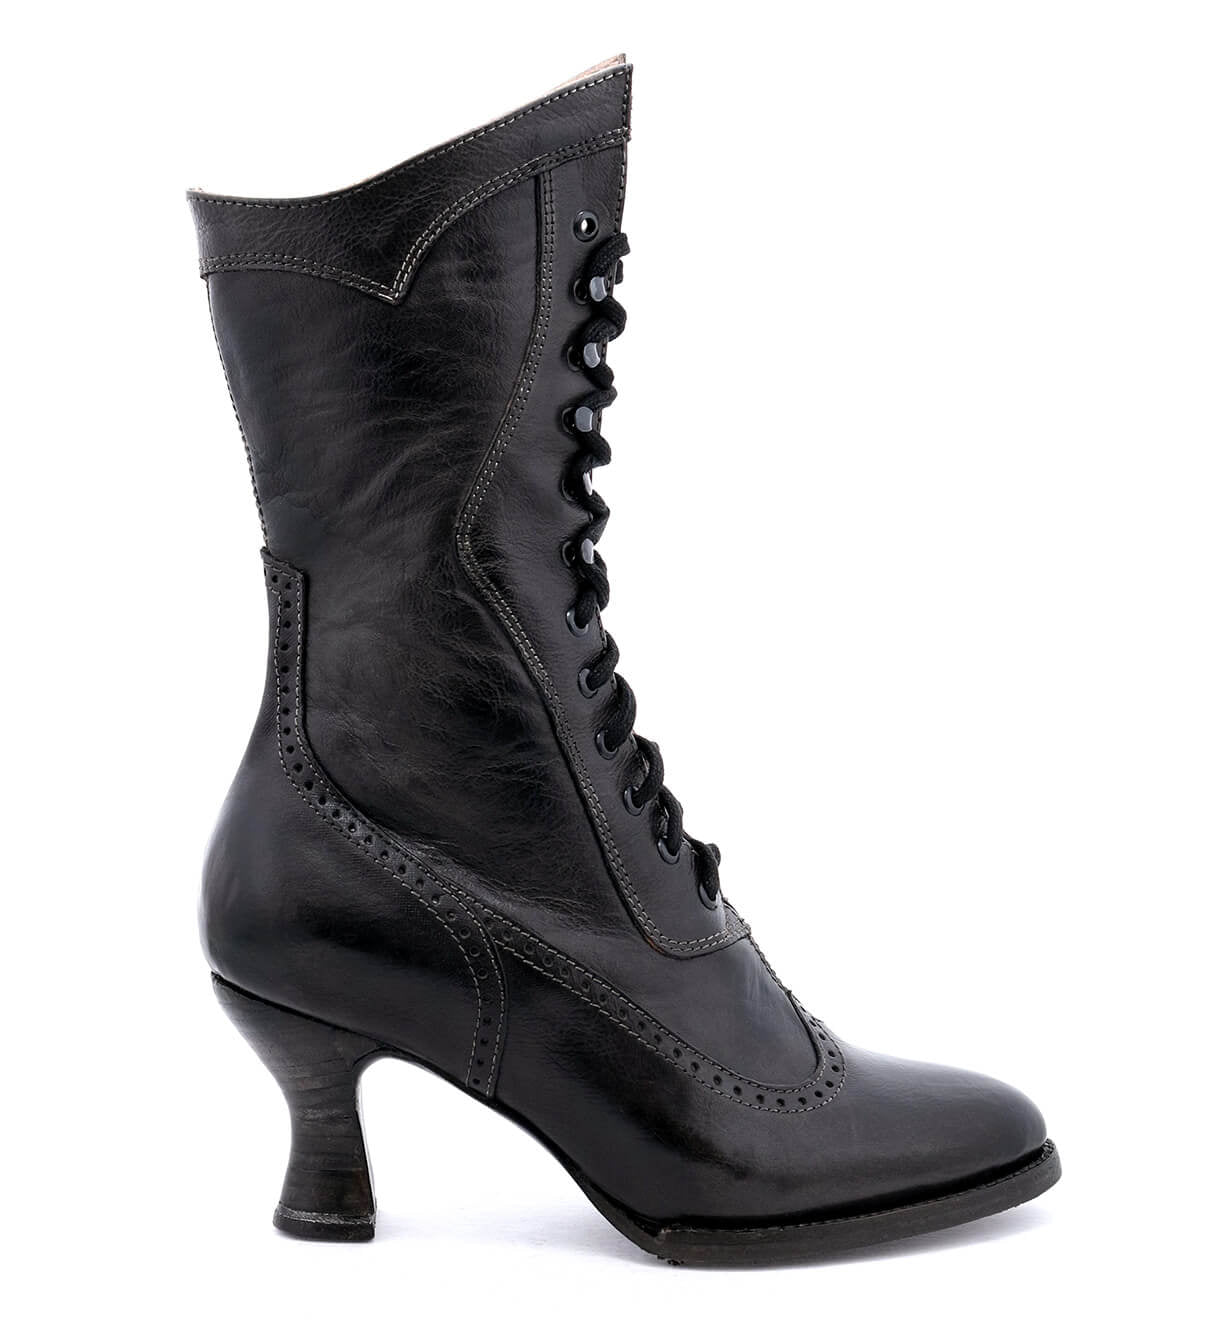 A hand crafted women's black leather boot with lace up detail, called Jasmine by Oak Tree Farms.